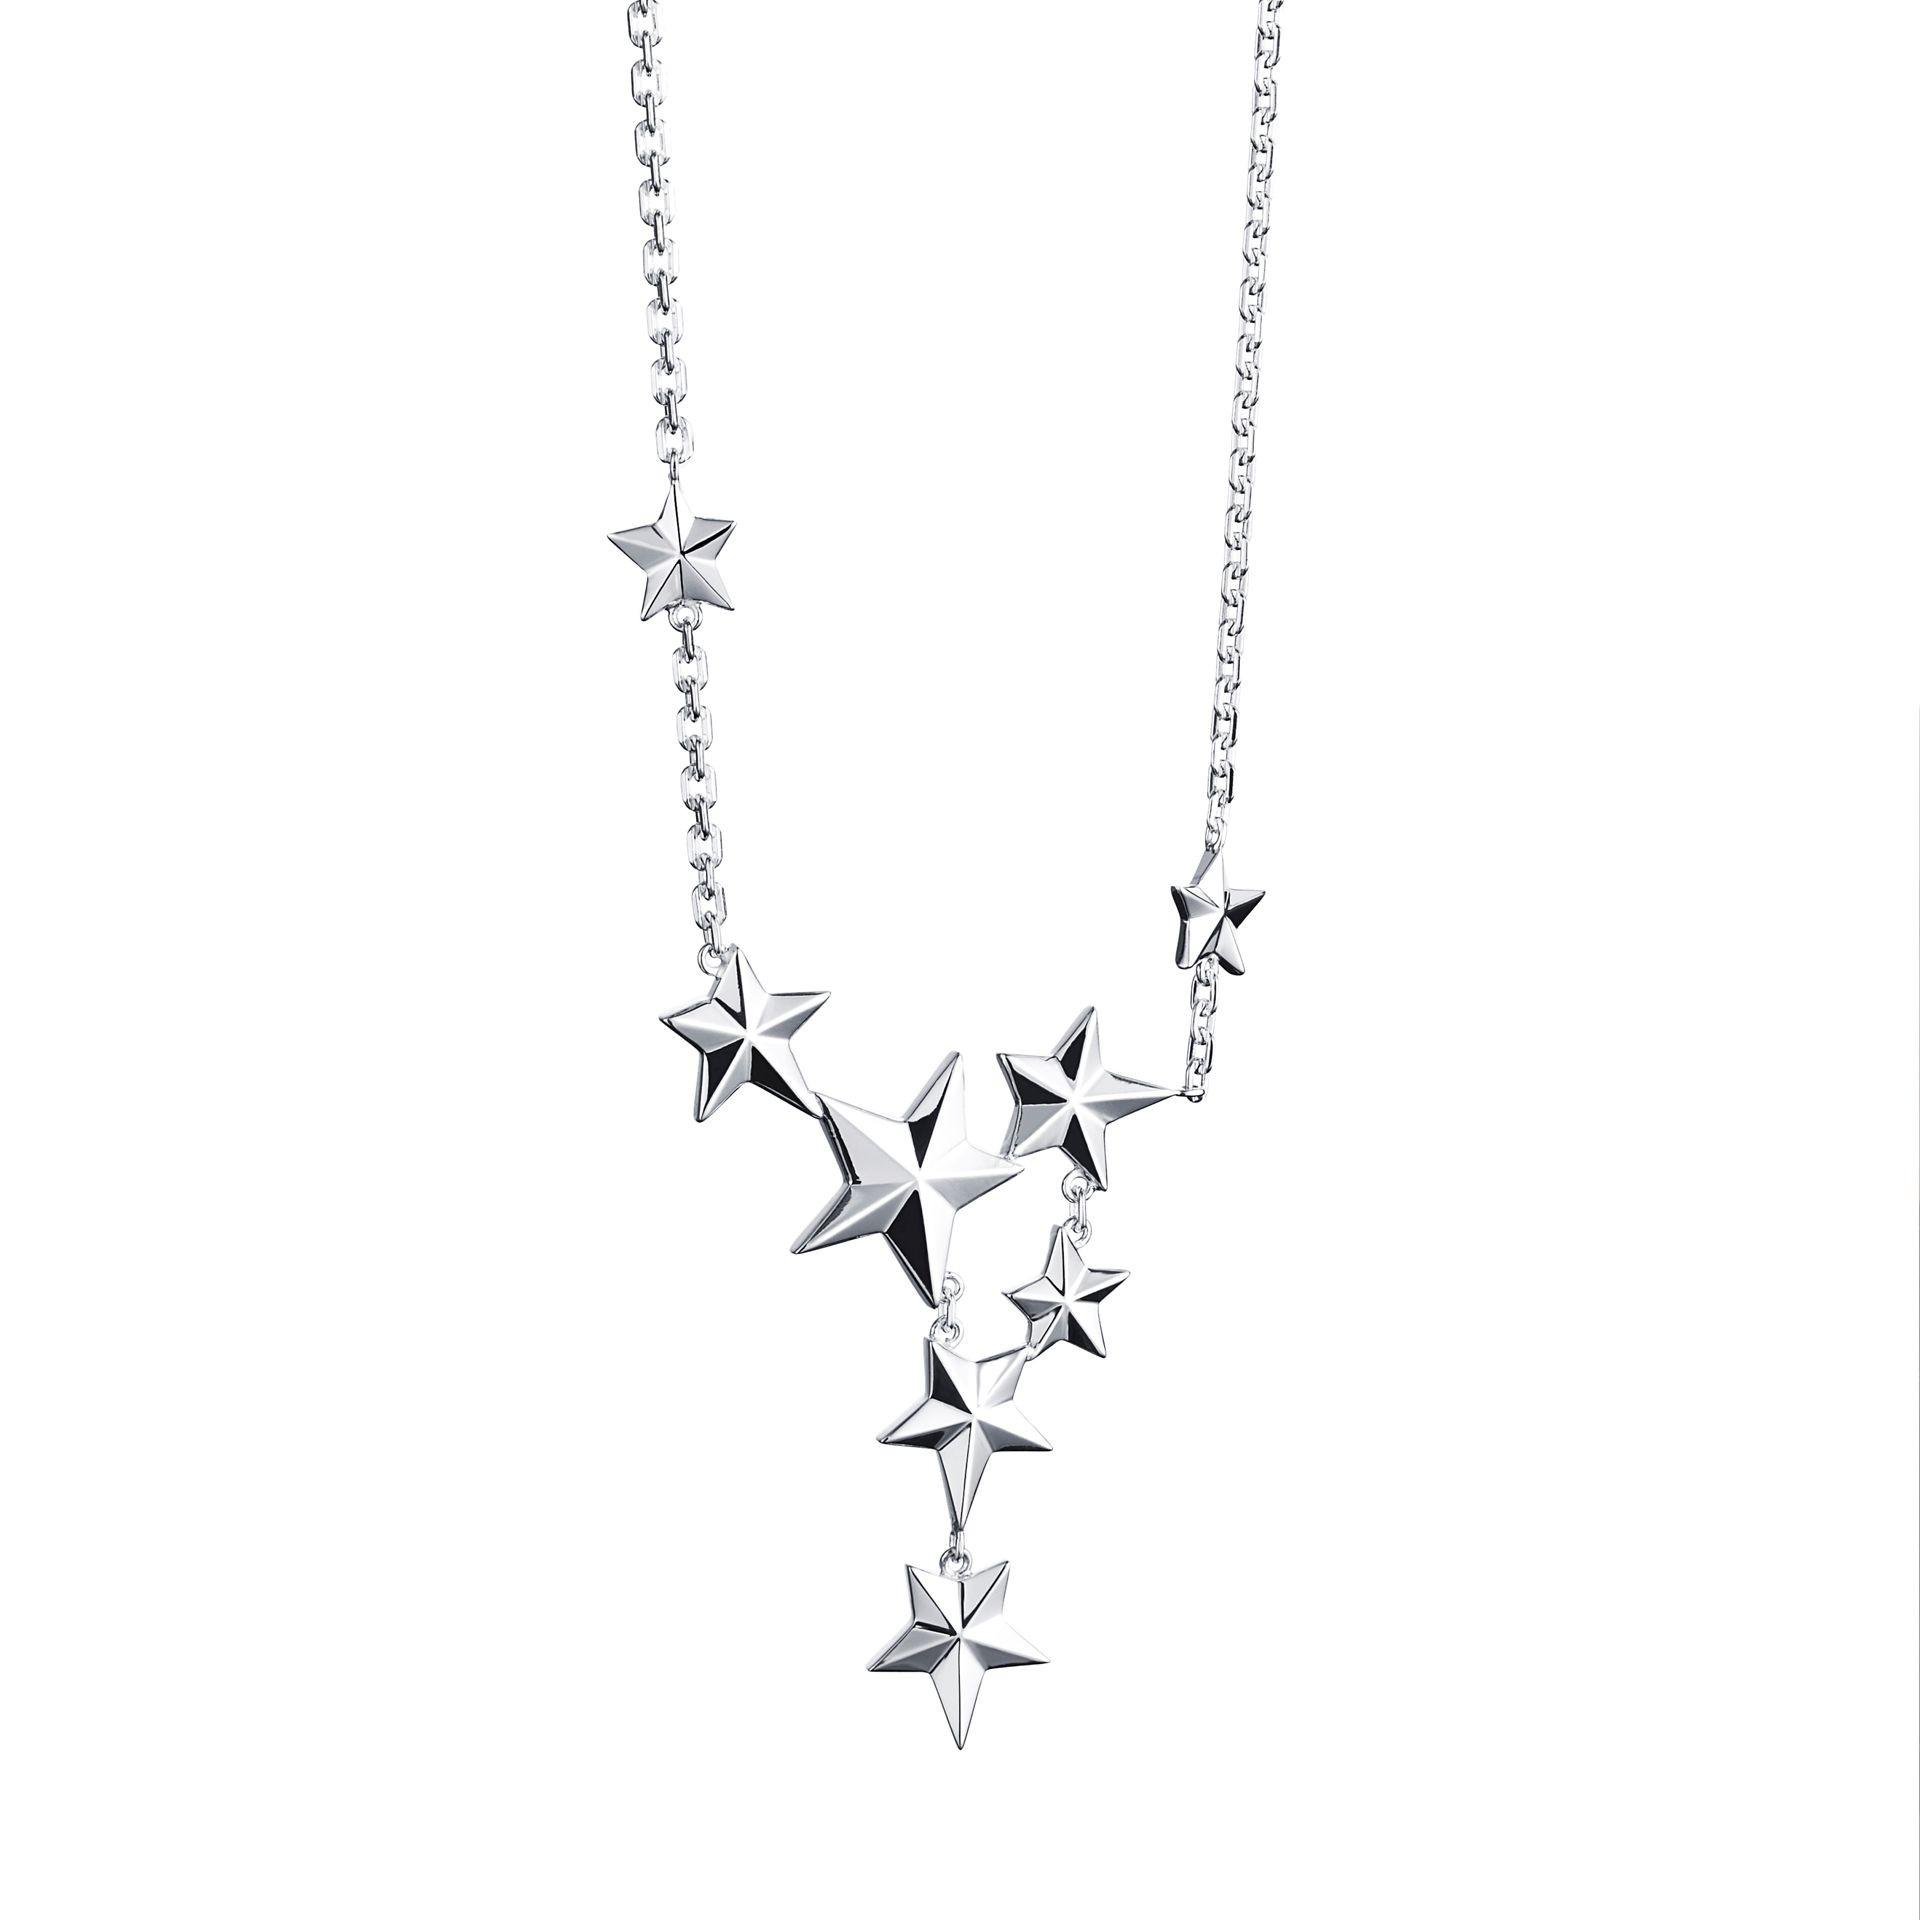 Catch A Falling Star Necklace